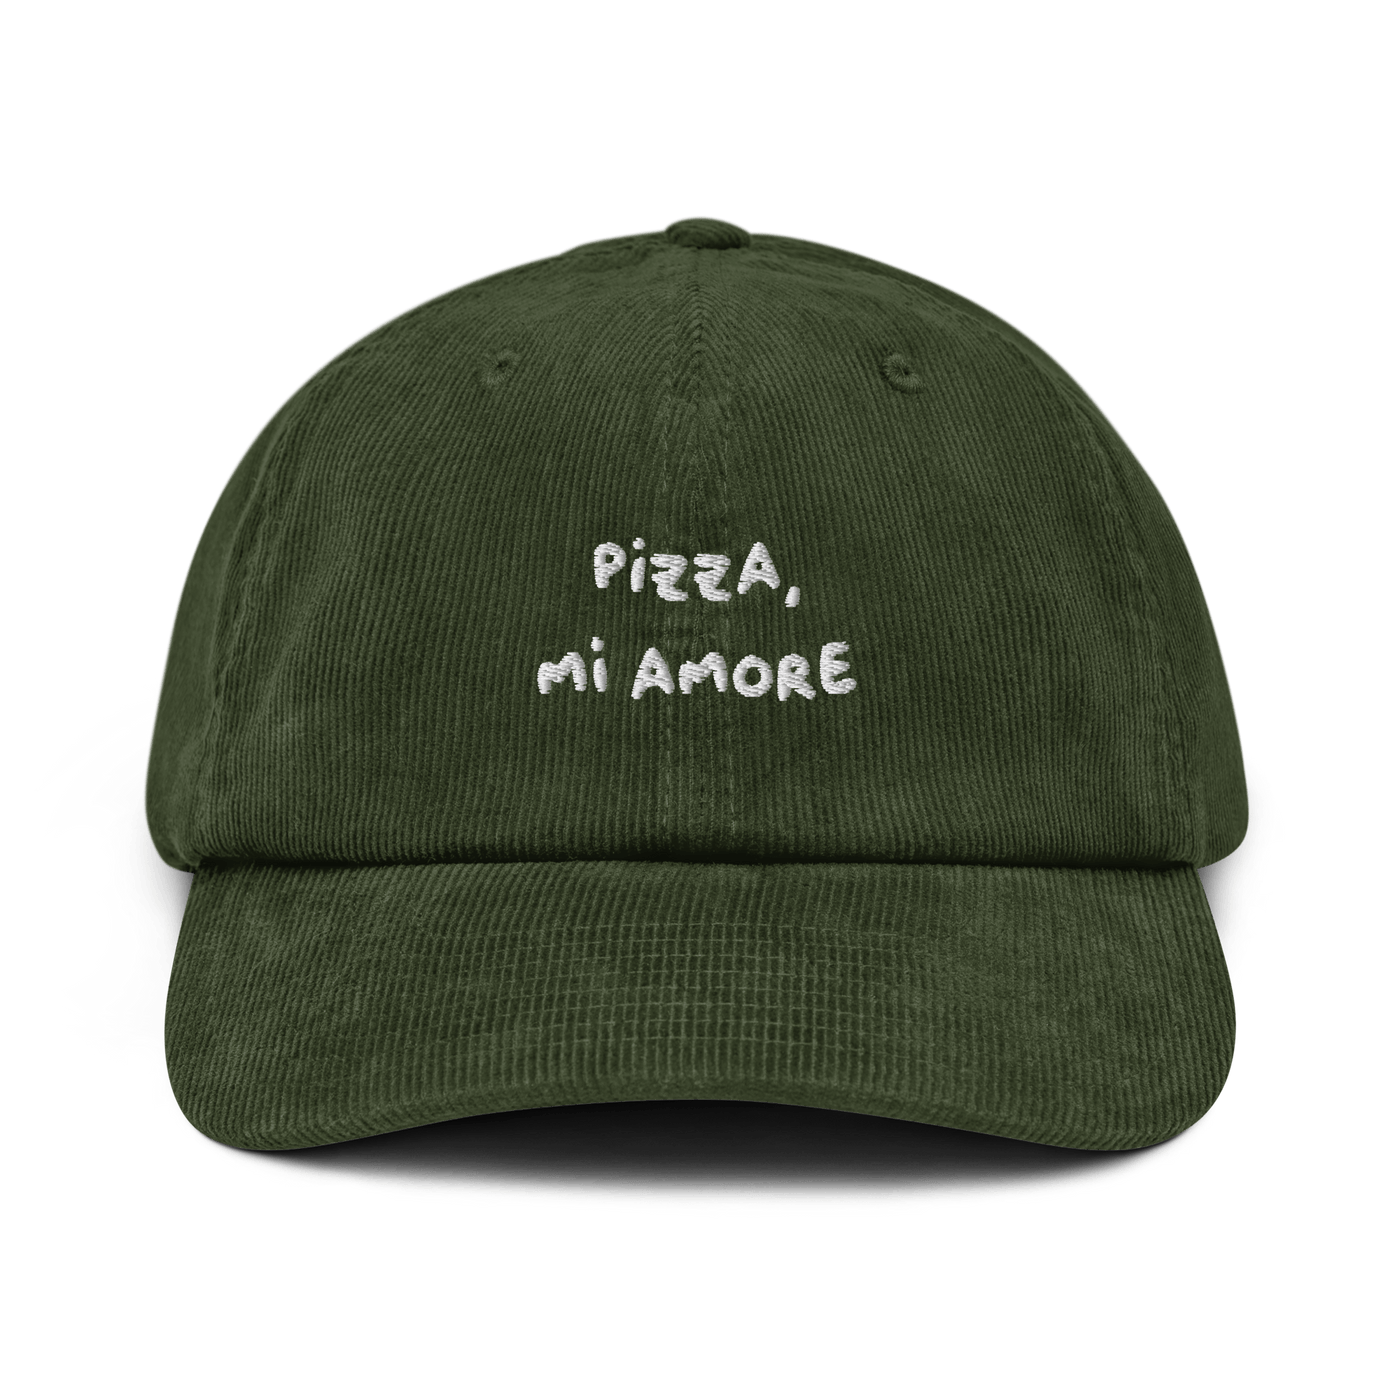 Pizza Mi Amore Corduroy hat - Dark Olive - - Just Another Cap Store